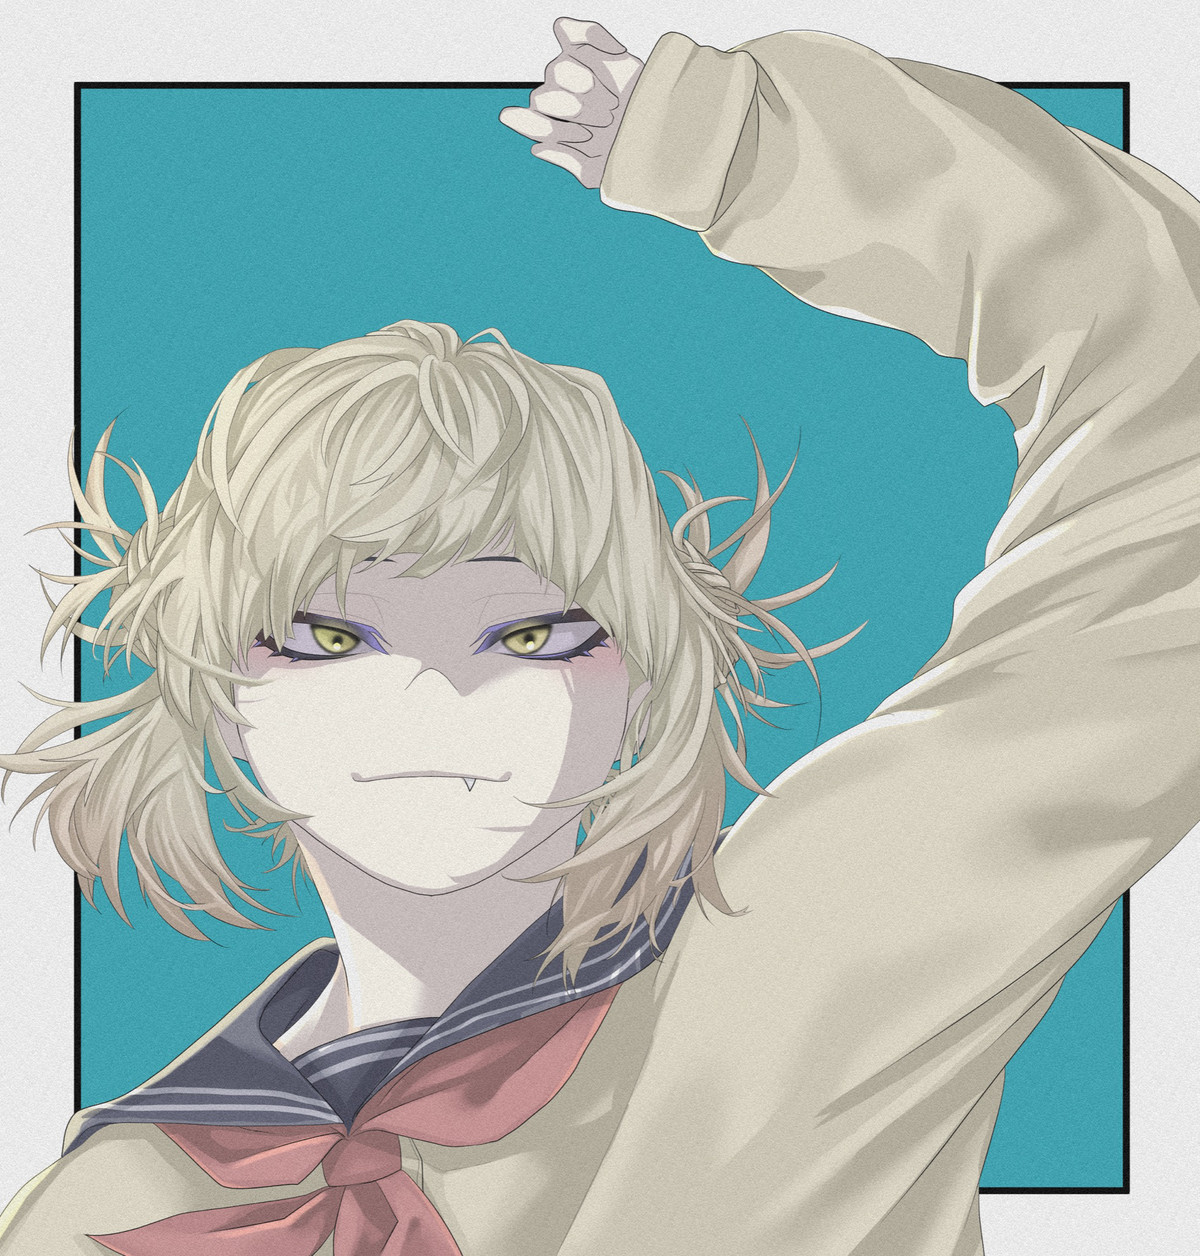 Daily Toga - 985: Looking Up. join list: DailyToga (477 subs)Mention History Source: .